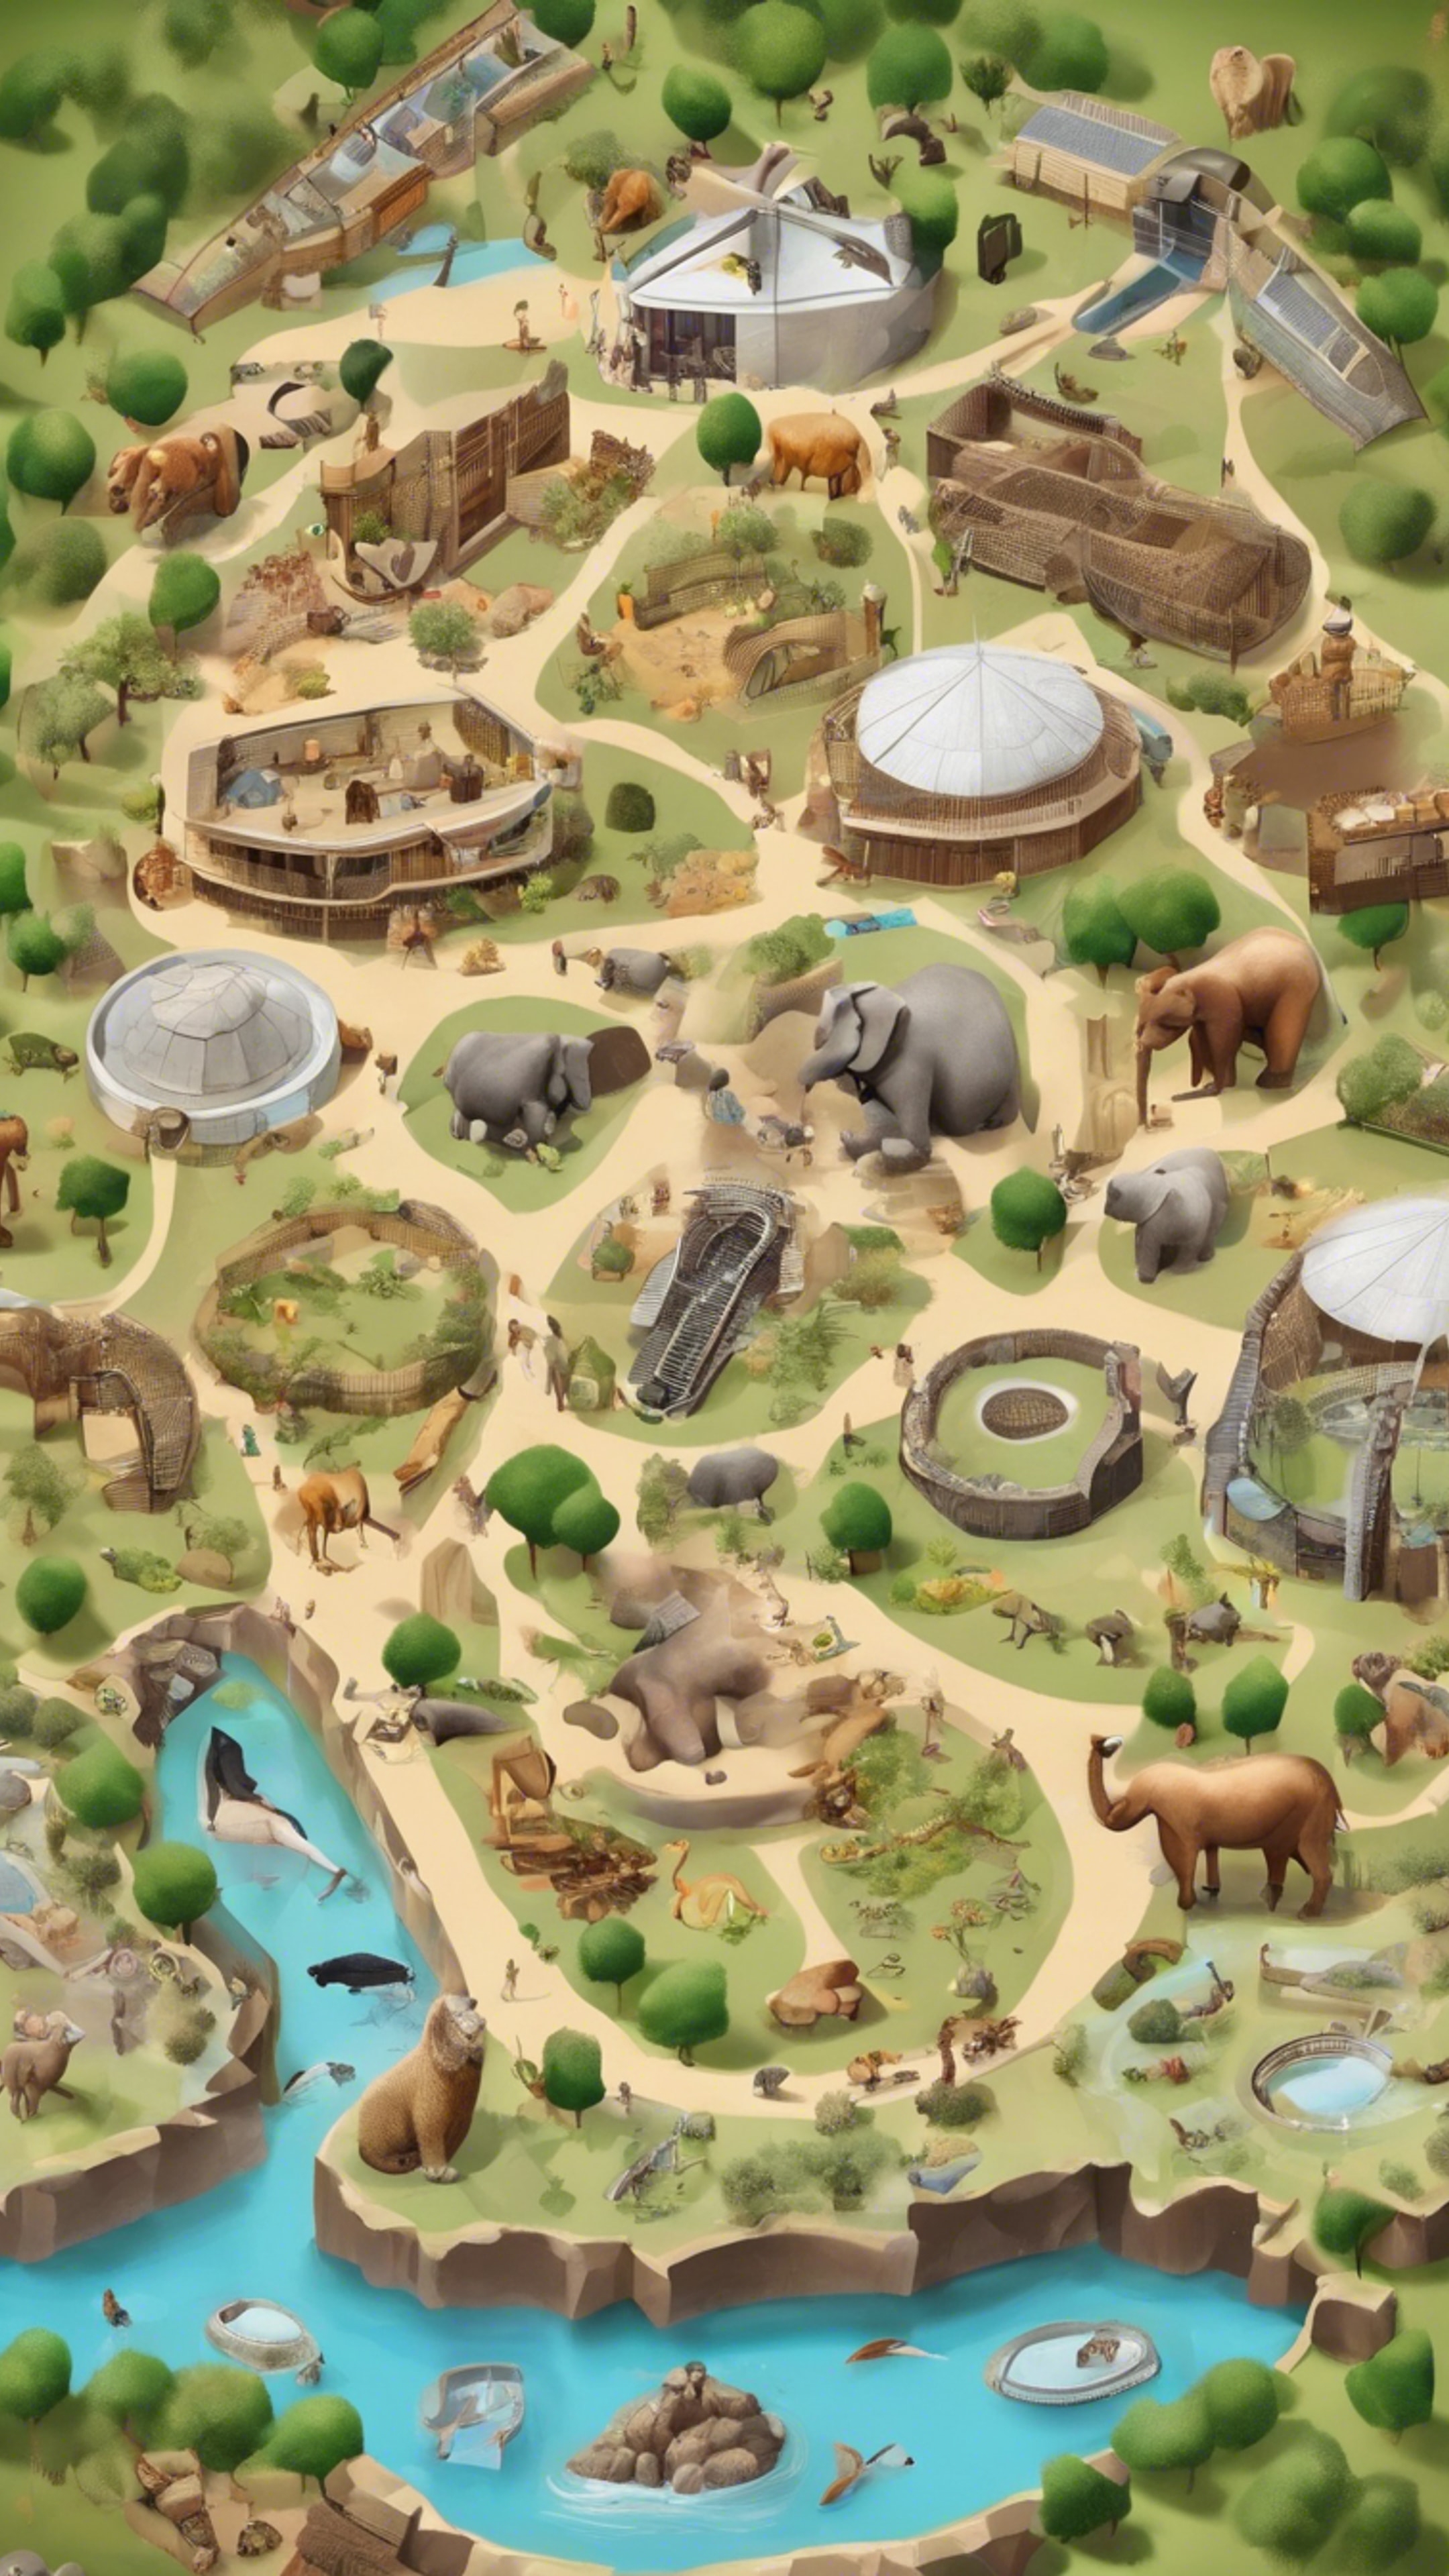 A graphic map of a zoo, with different animal enclosures, food stalls and amenities. Tapet[7d3ed7eed3f244f7a17f]